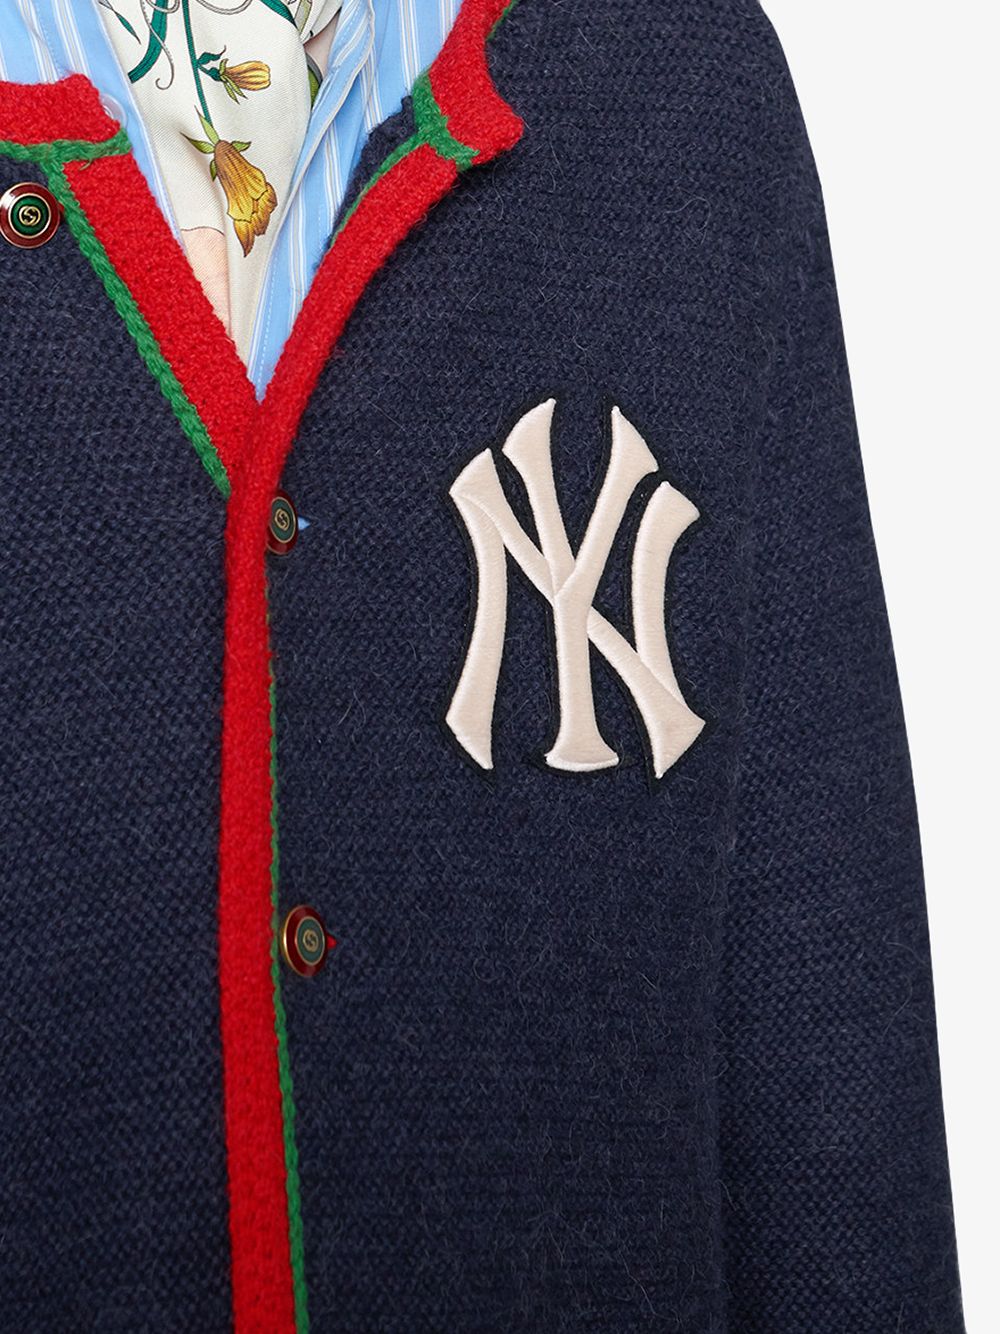 Gucci Houndstooth Coat With NY Yankees™ Patches - Farfetch